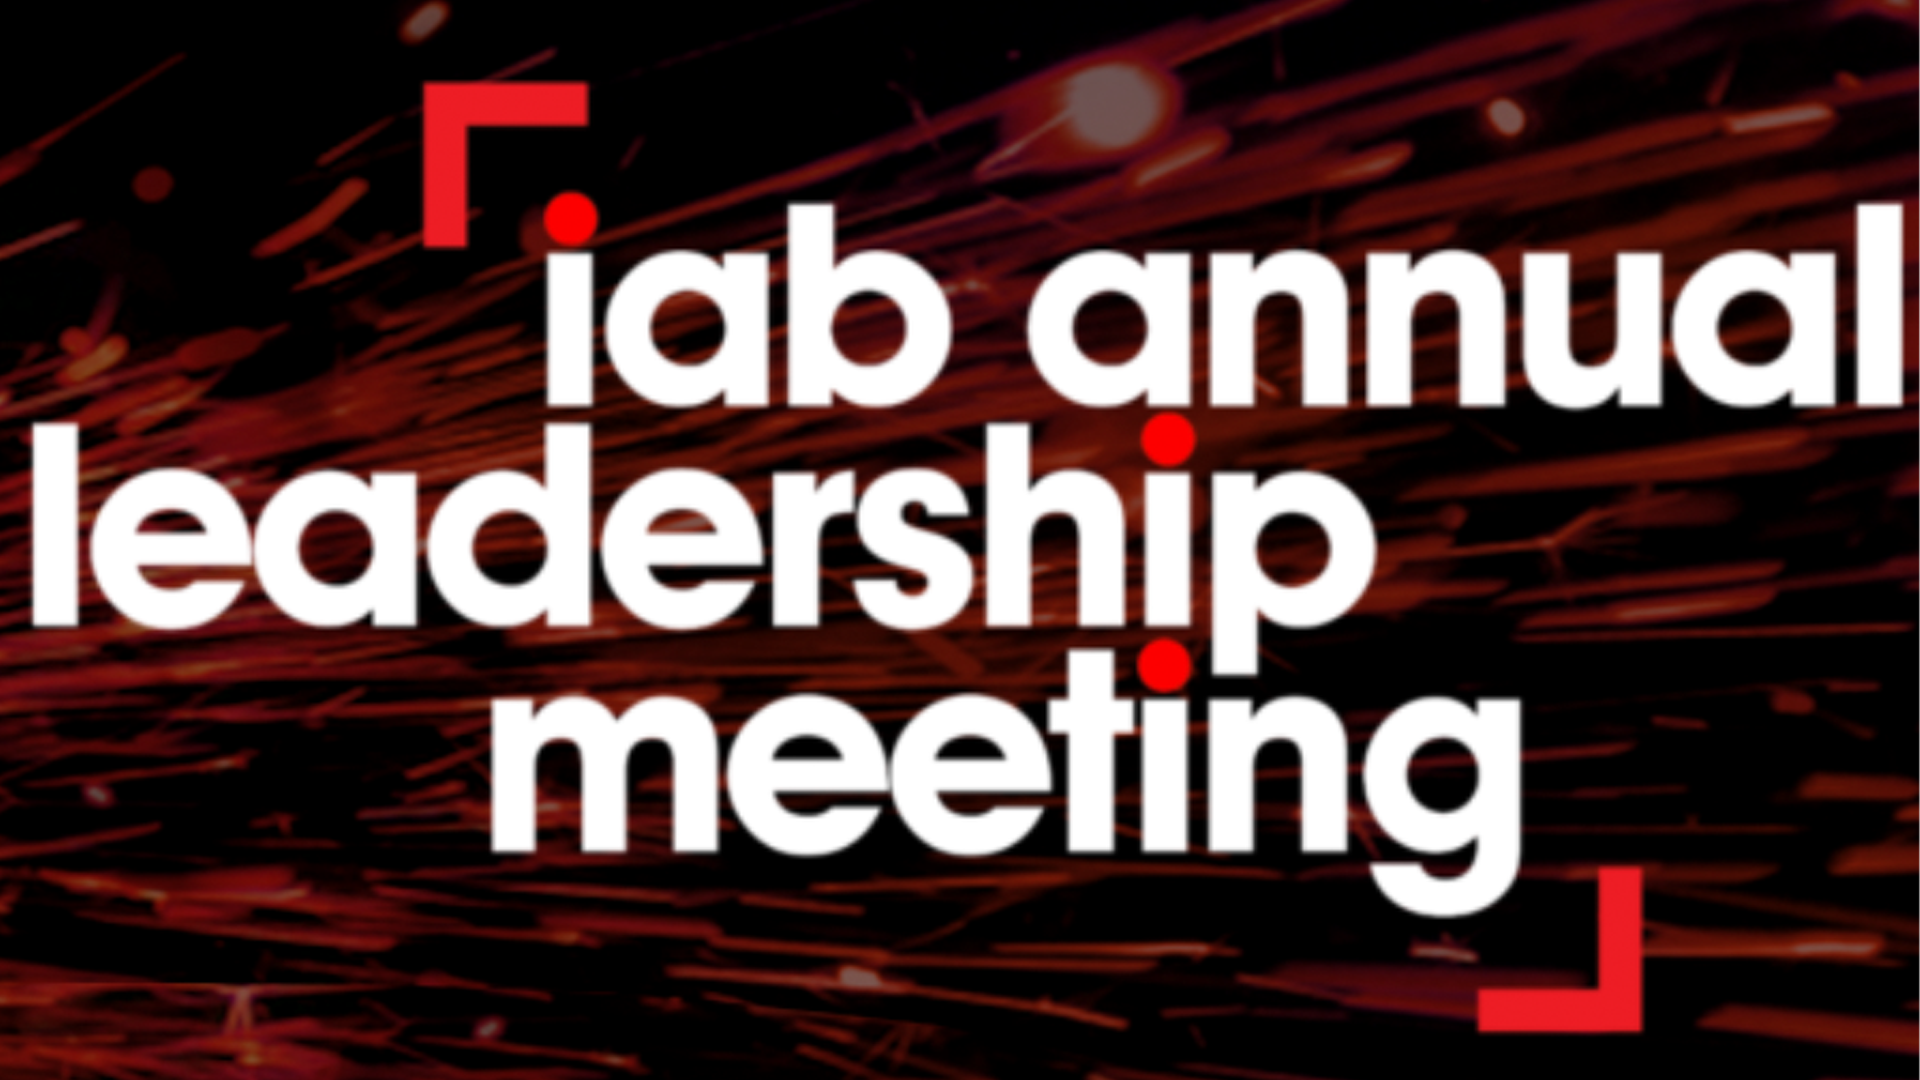 Video, Data, the Direct Brand Economy (DTC) and more, notes from the IAB ALM